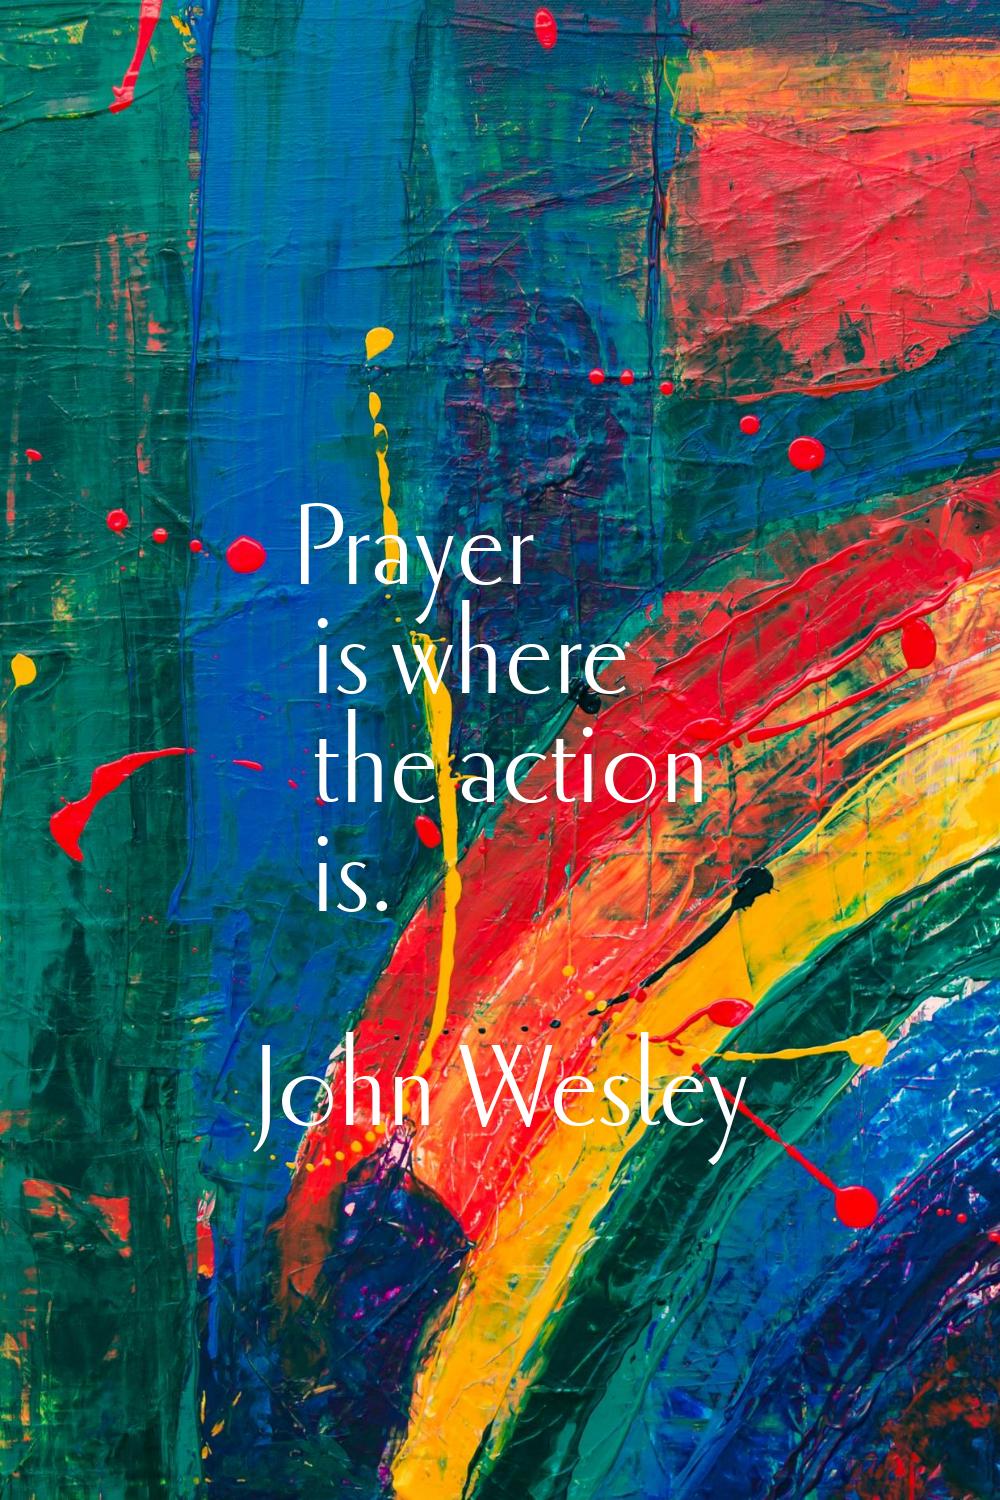 Prayer is where the action is.